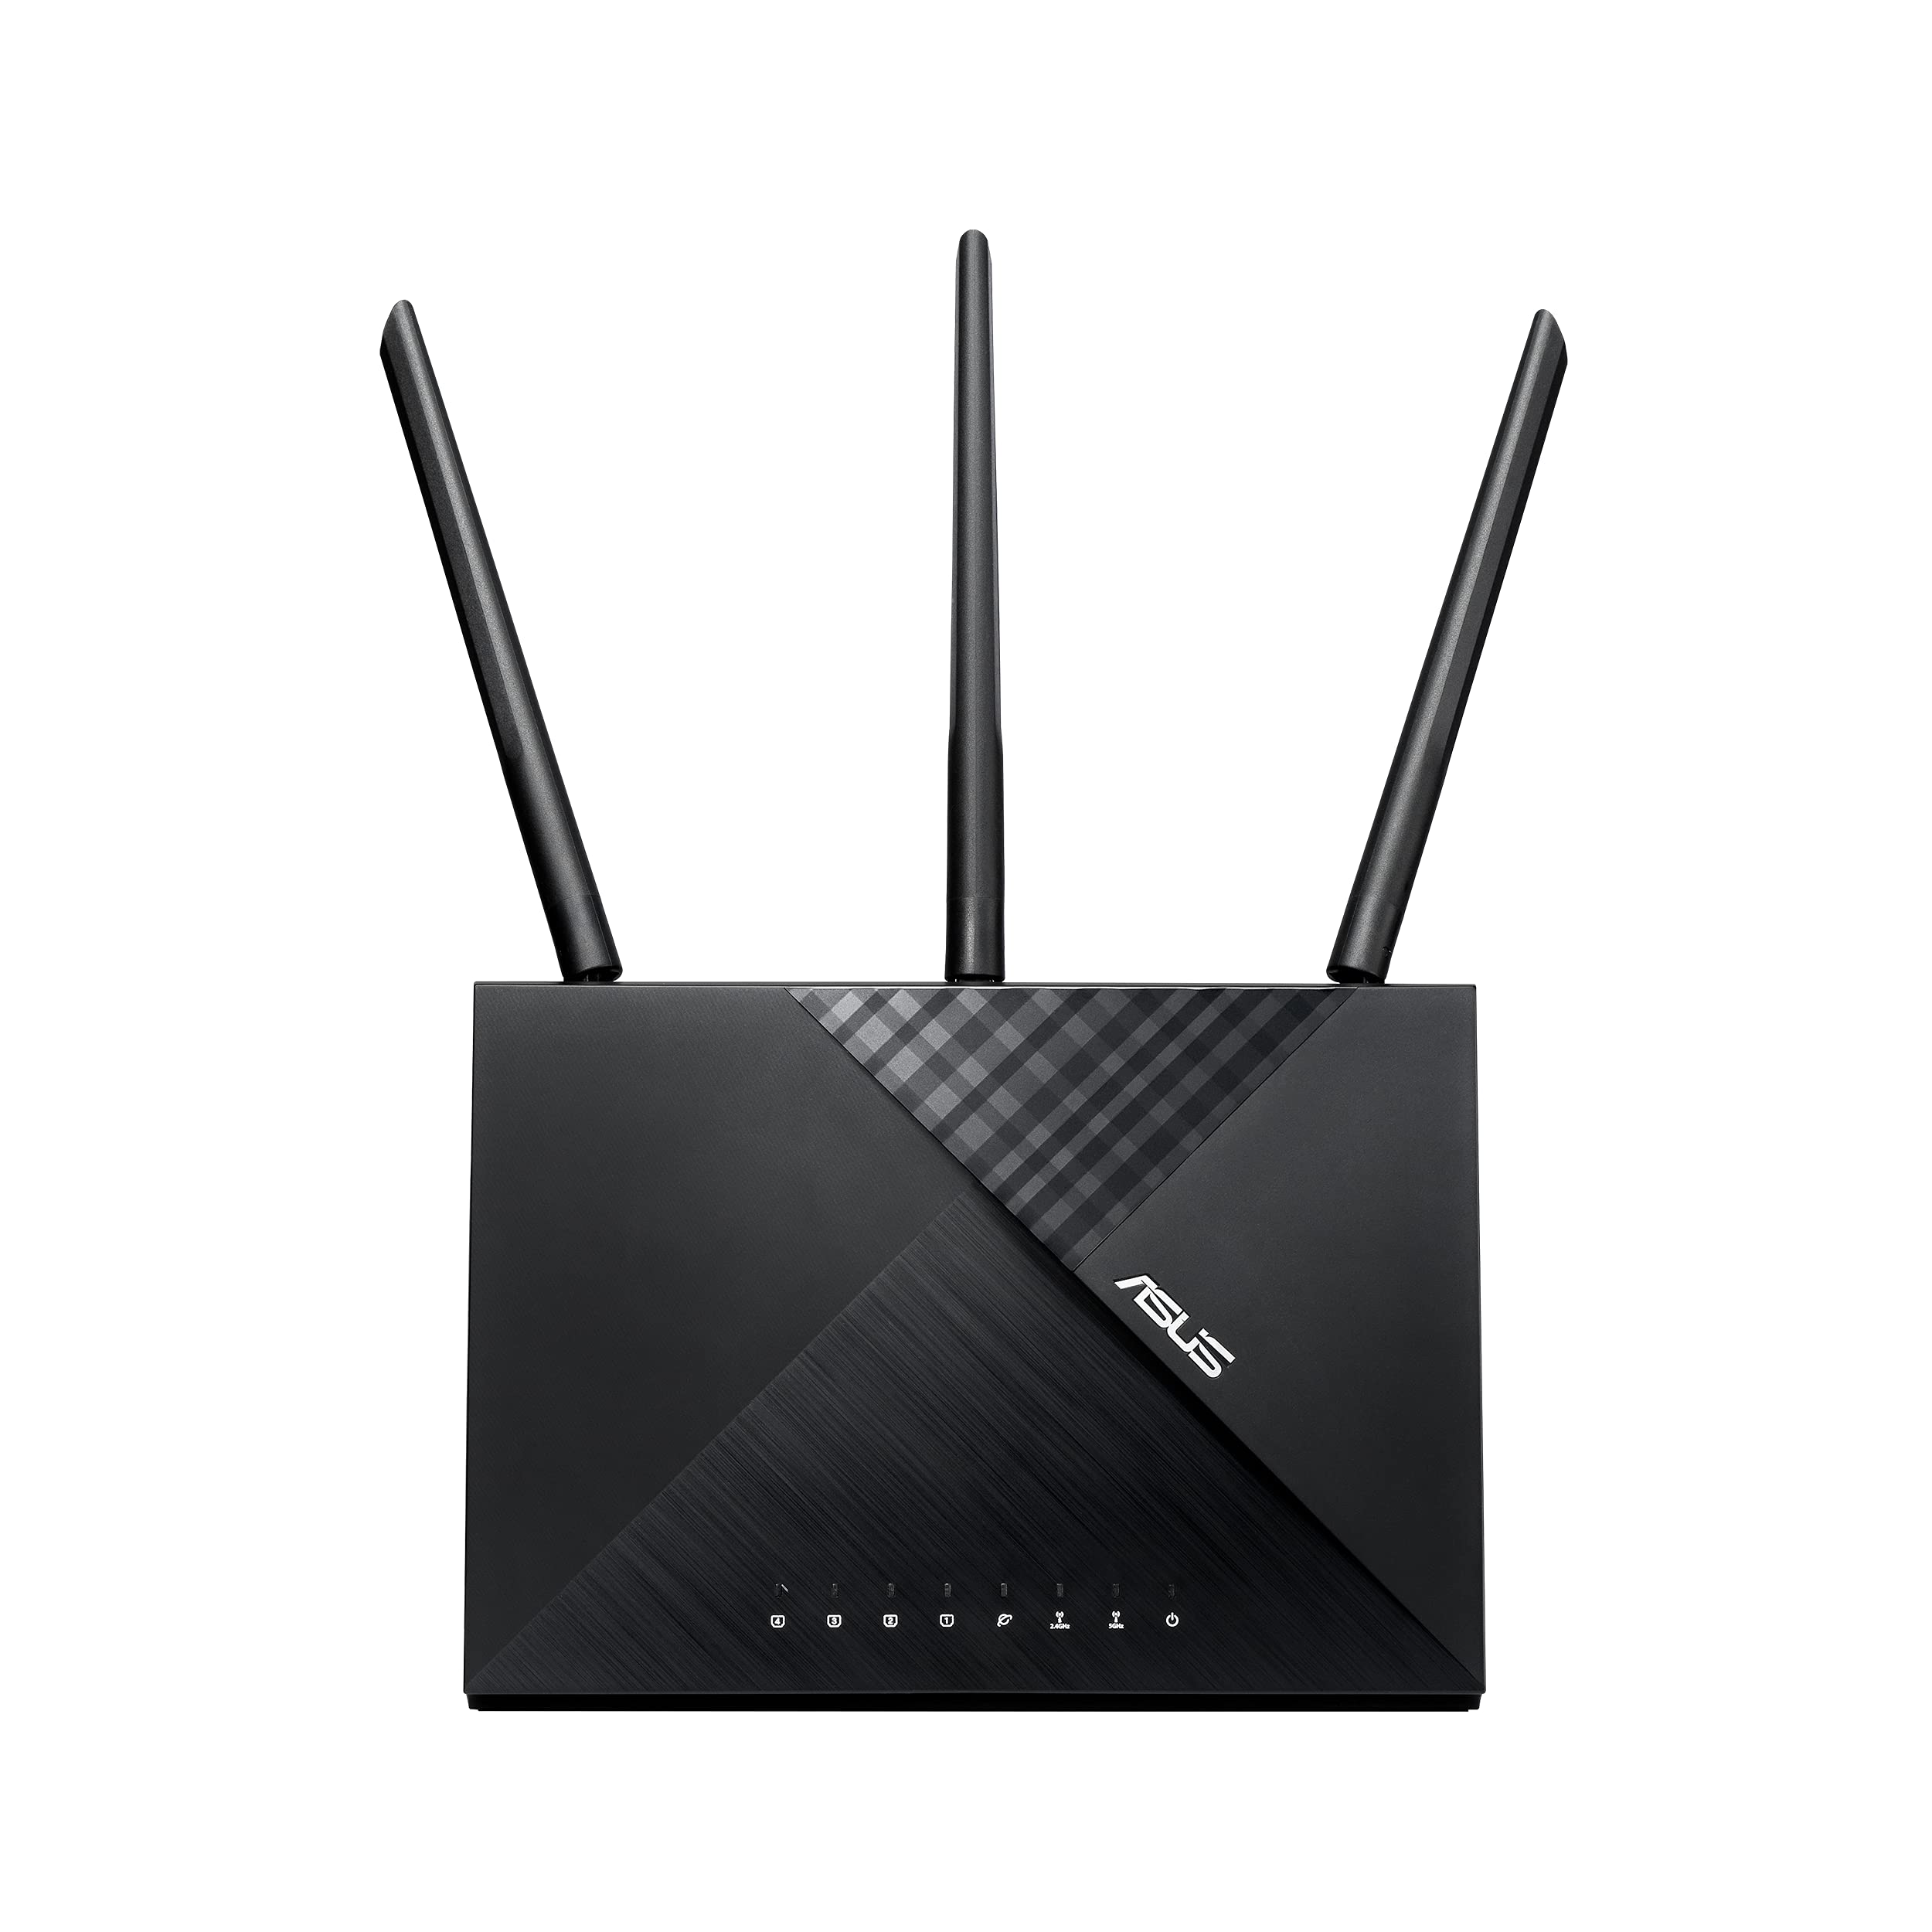 Router with signal bars